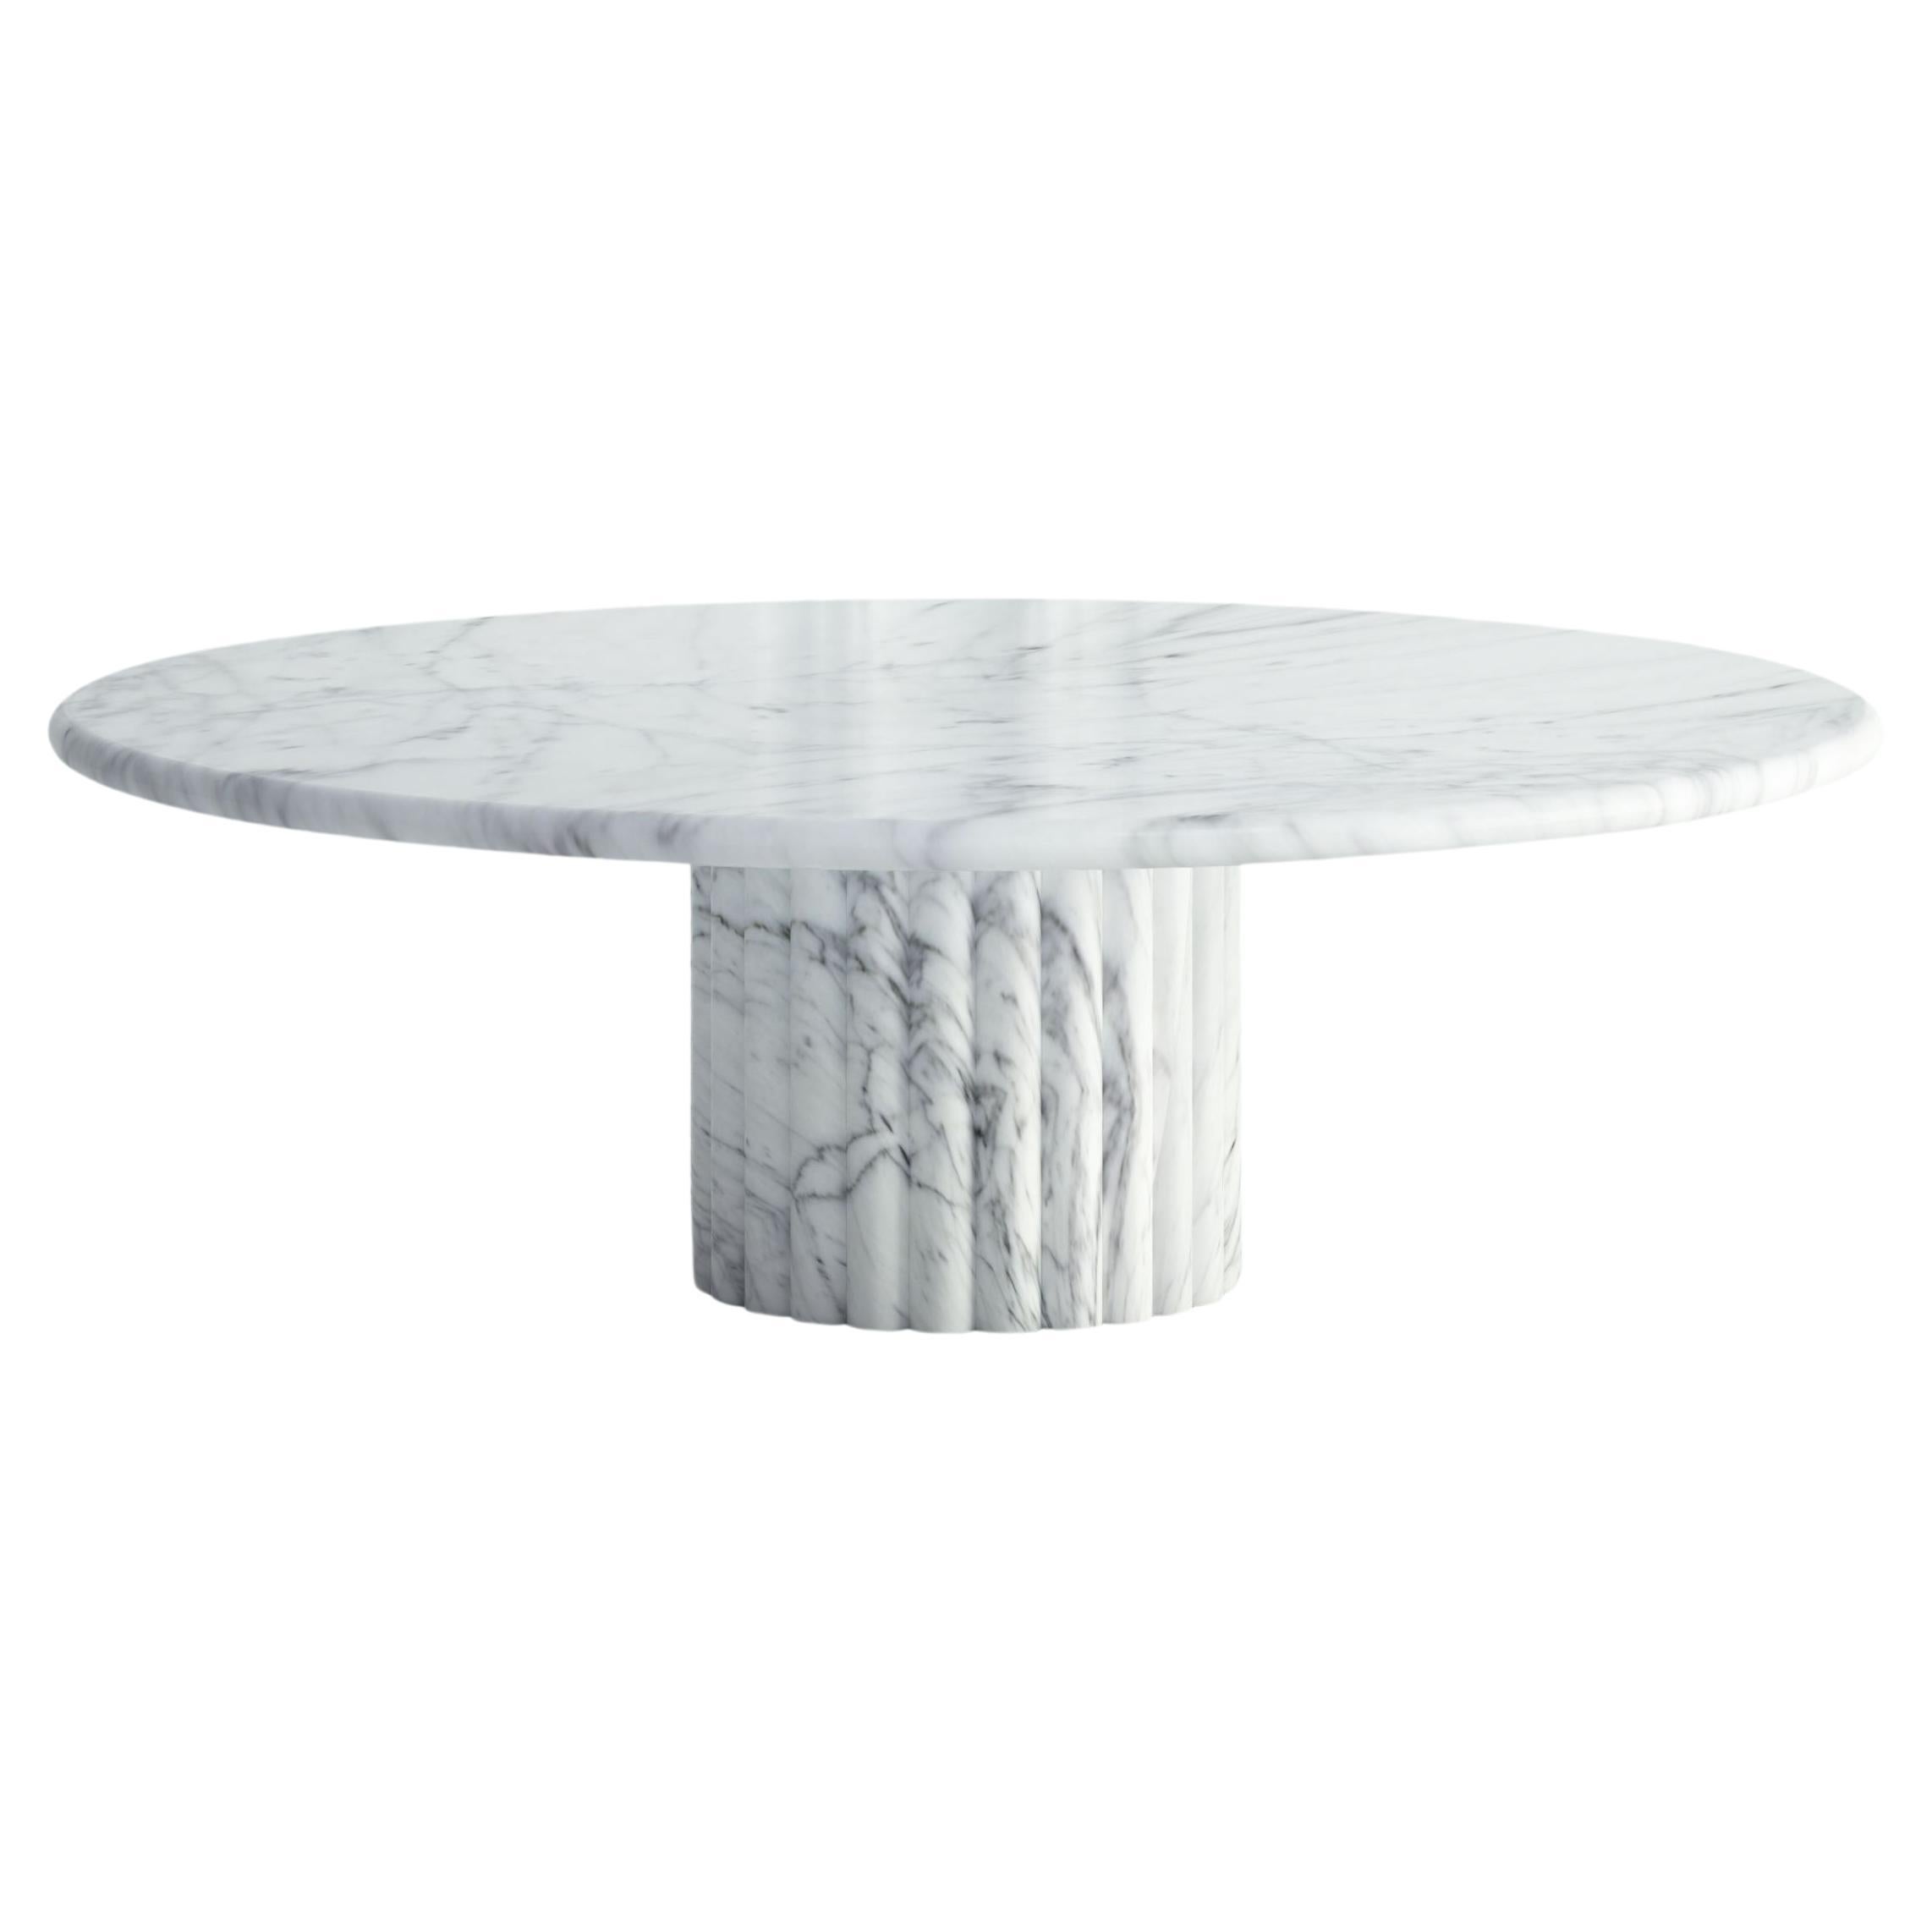 The Lucie:  A Modern Stone Coffee Table with Round Top and Base